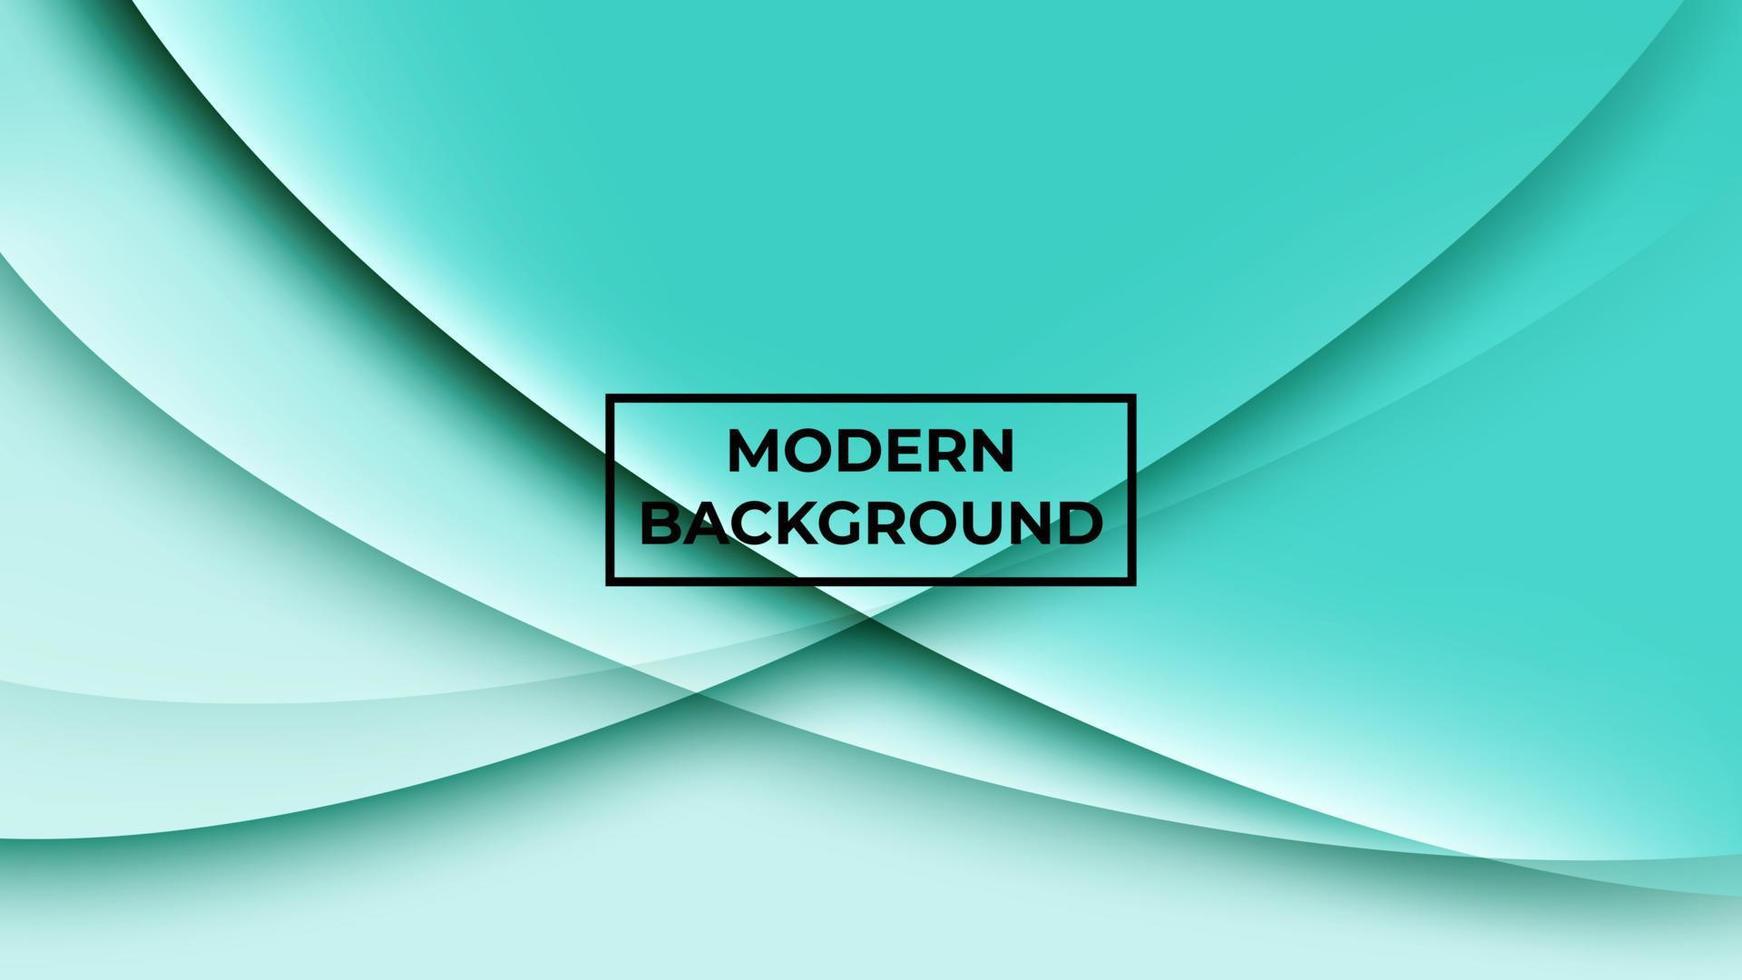 Modern background with teal color and overlapping circle curves, easy to edit vector